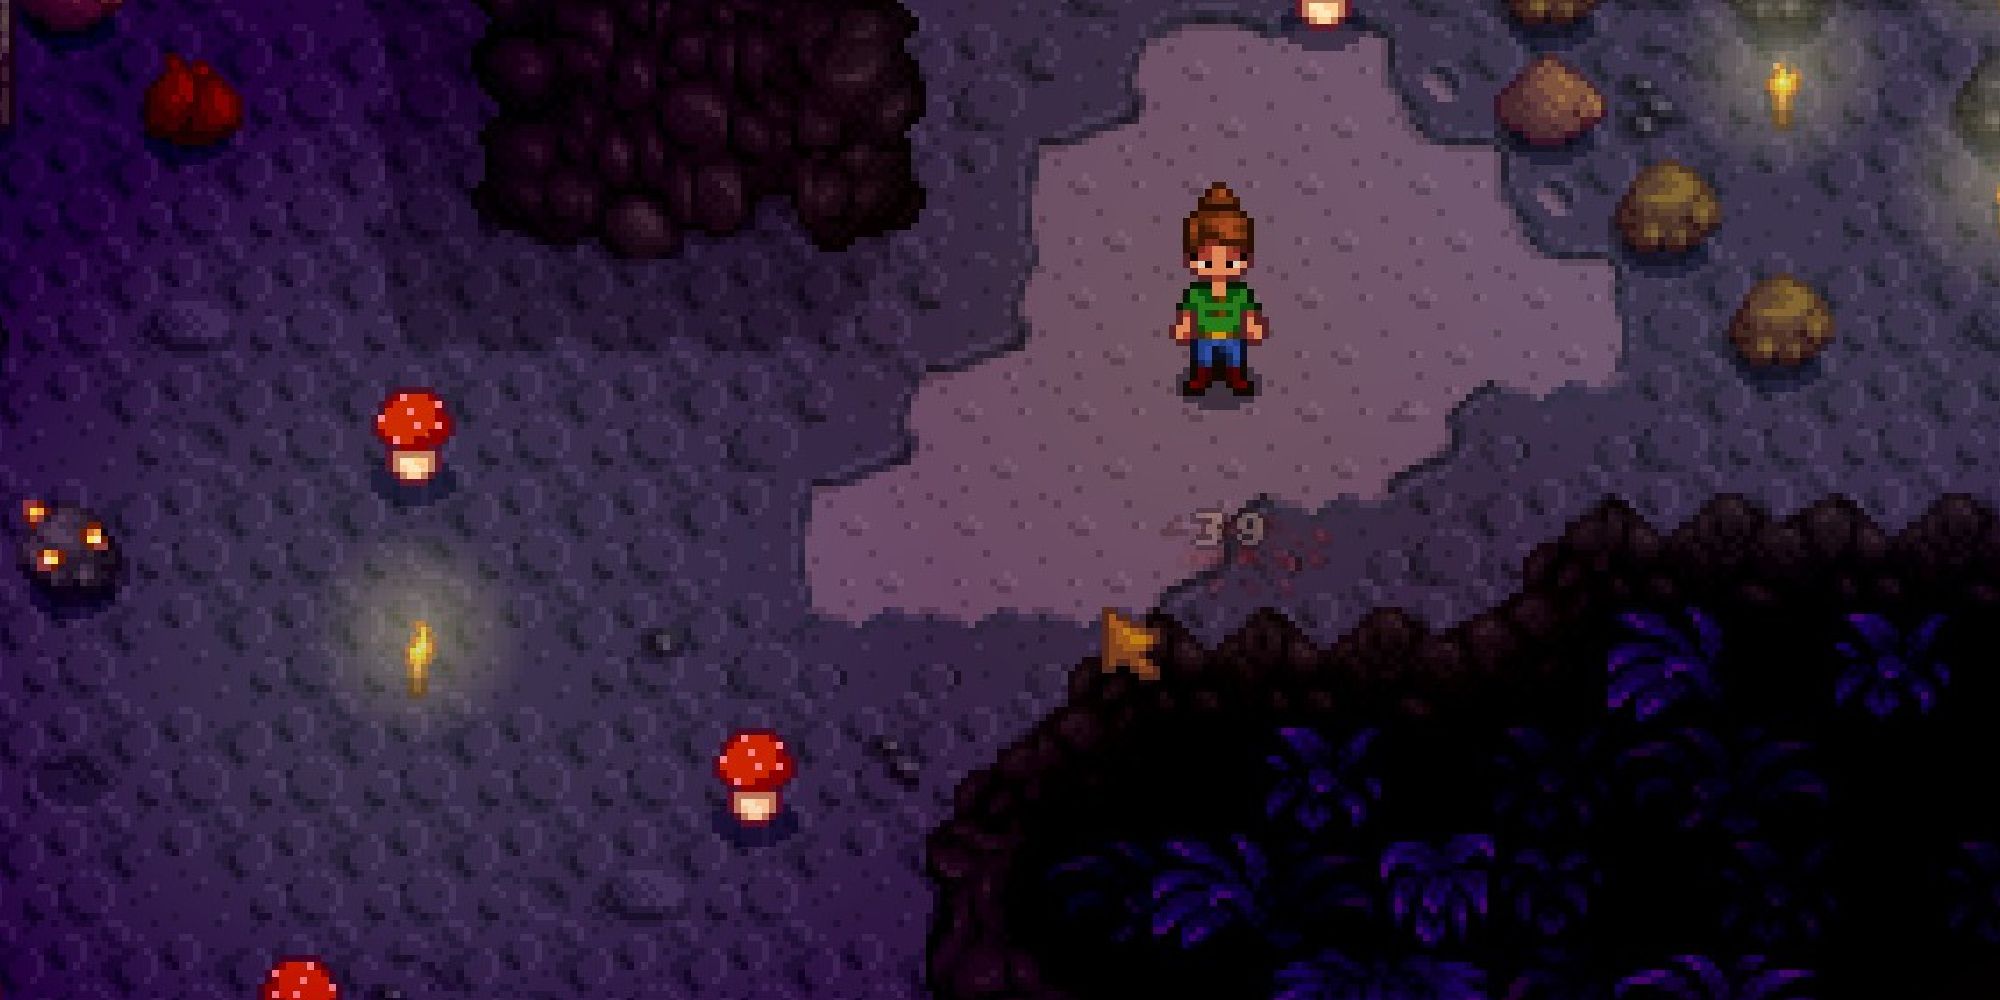 stardew valley player in cave with red mushrooms